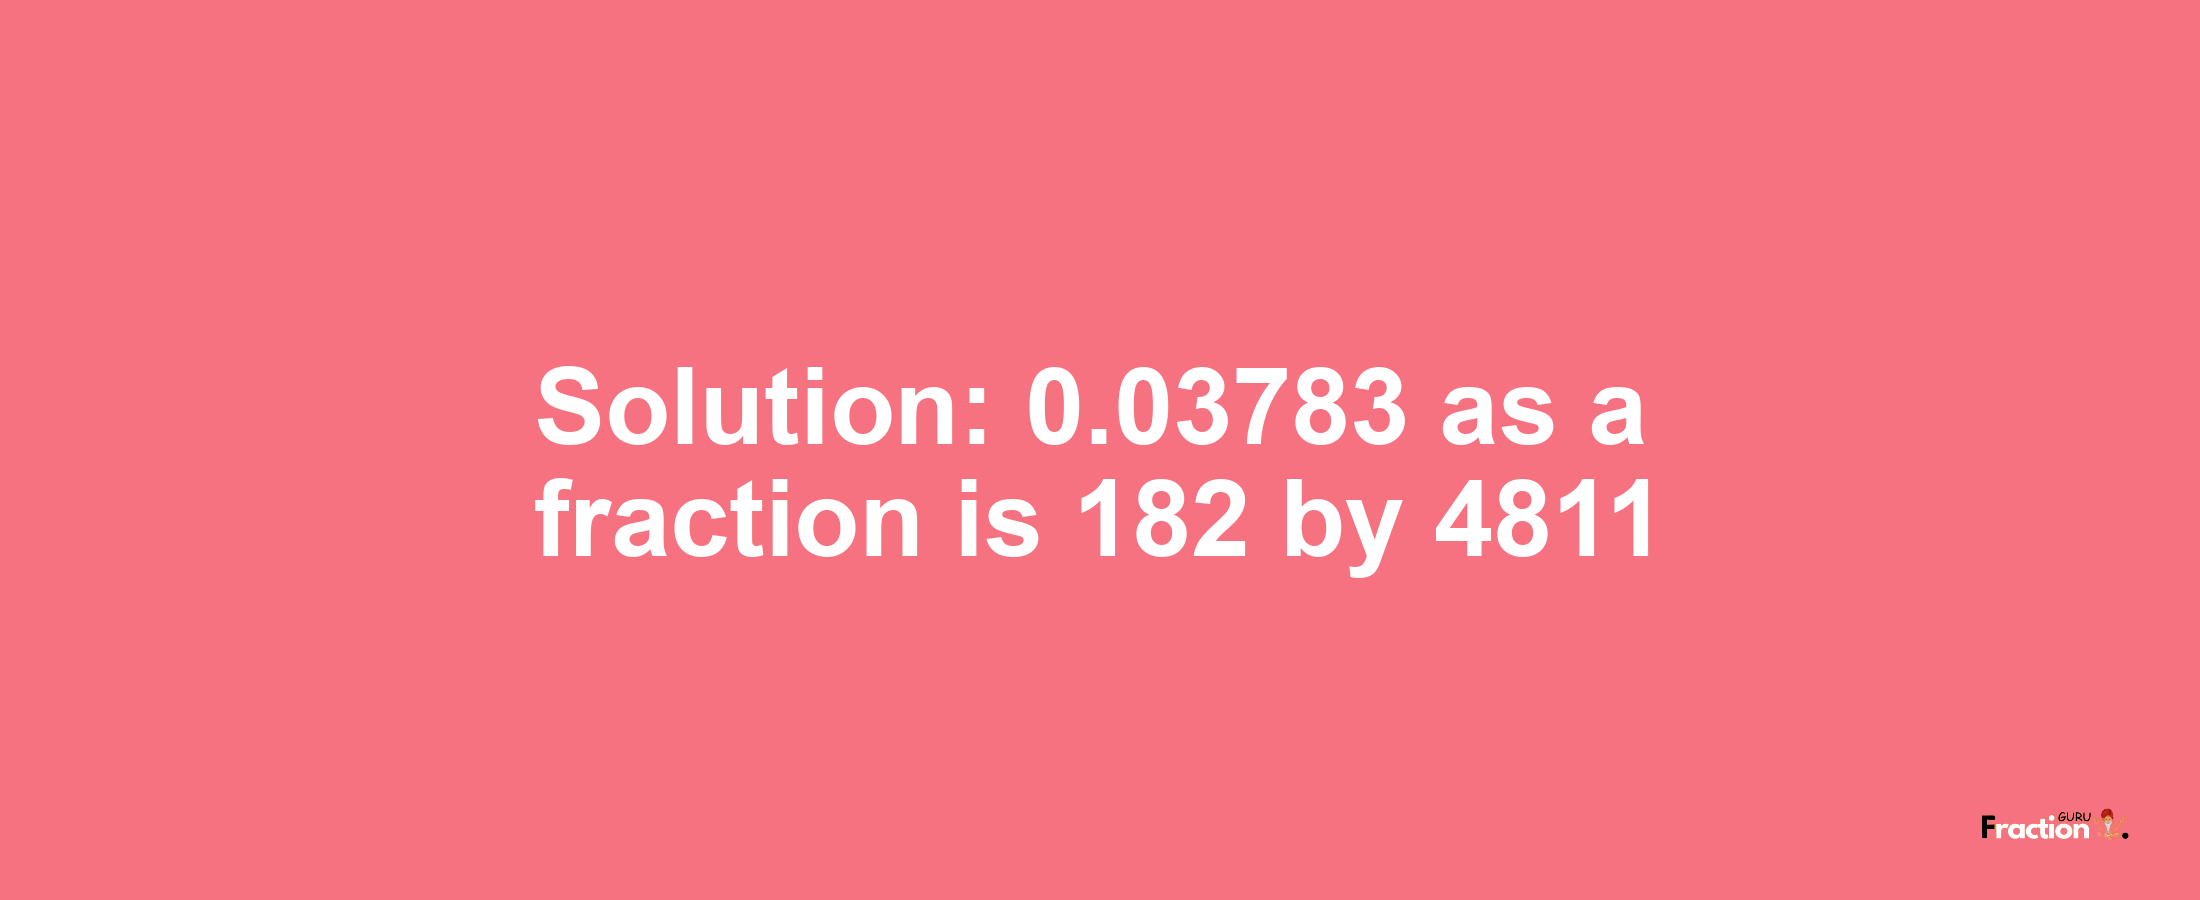 Solution:0.03783 as a fraction is 182/4811